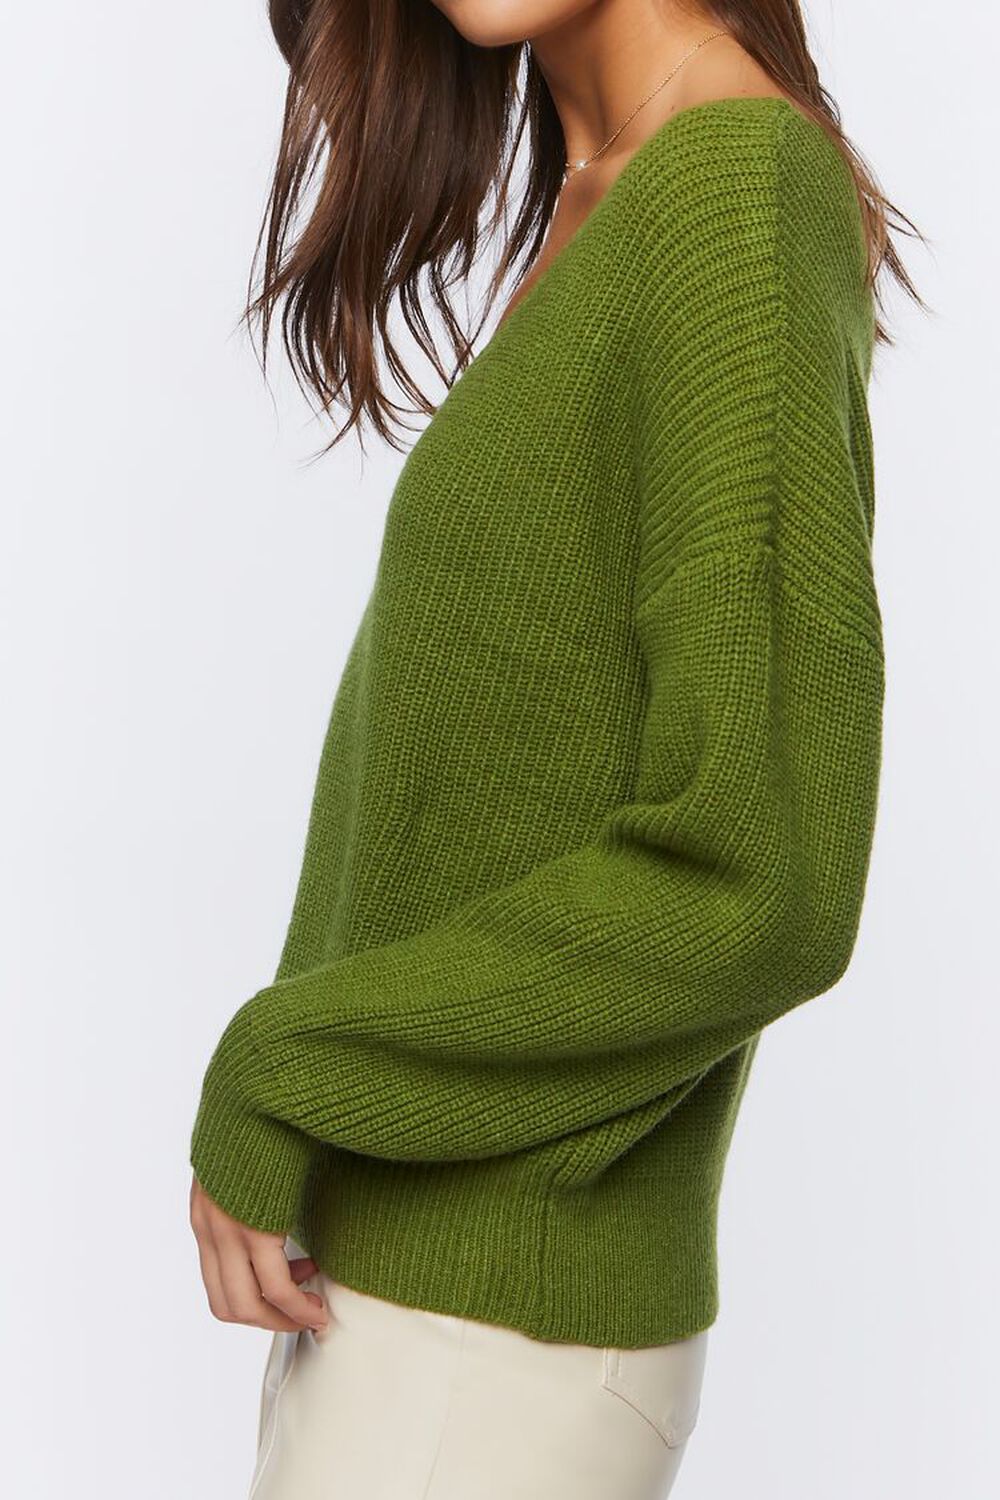 OLIVE Ribbed Drop-Sleeve Sweater, image 2